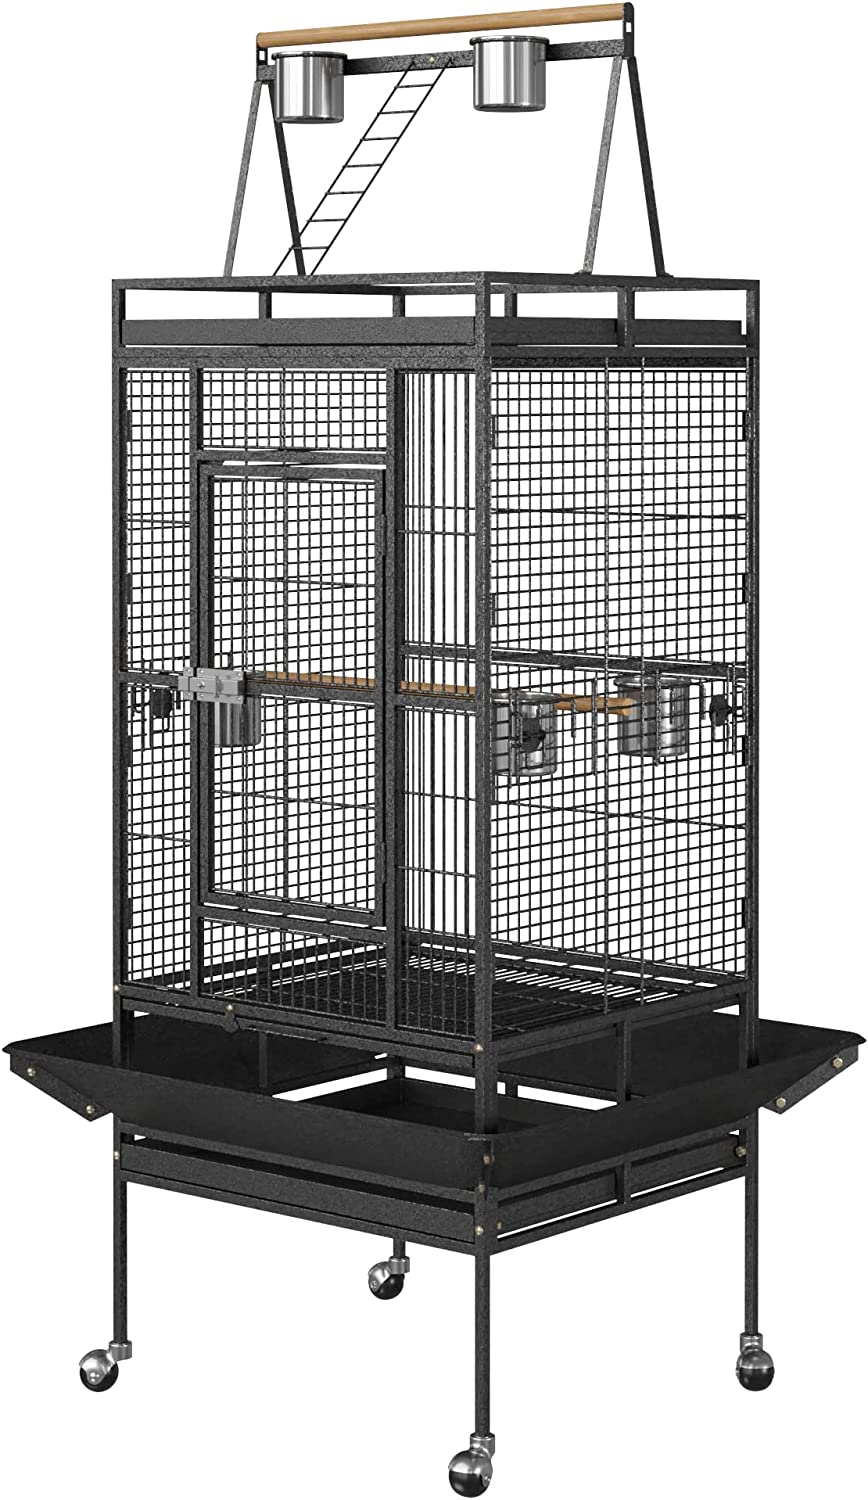 68-Inch Birdcage, Playtop Parrot Cage, Wrought Iron Bird Cage with Rolling Stand, Heavy-Duty Pet Bird House for Parrot Cockatiel Cockatoo Parakeet Macaw Finches, Black